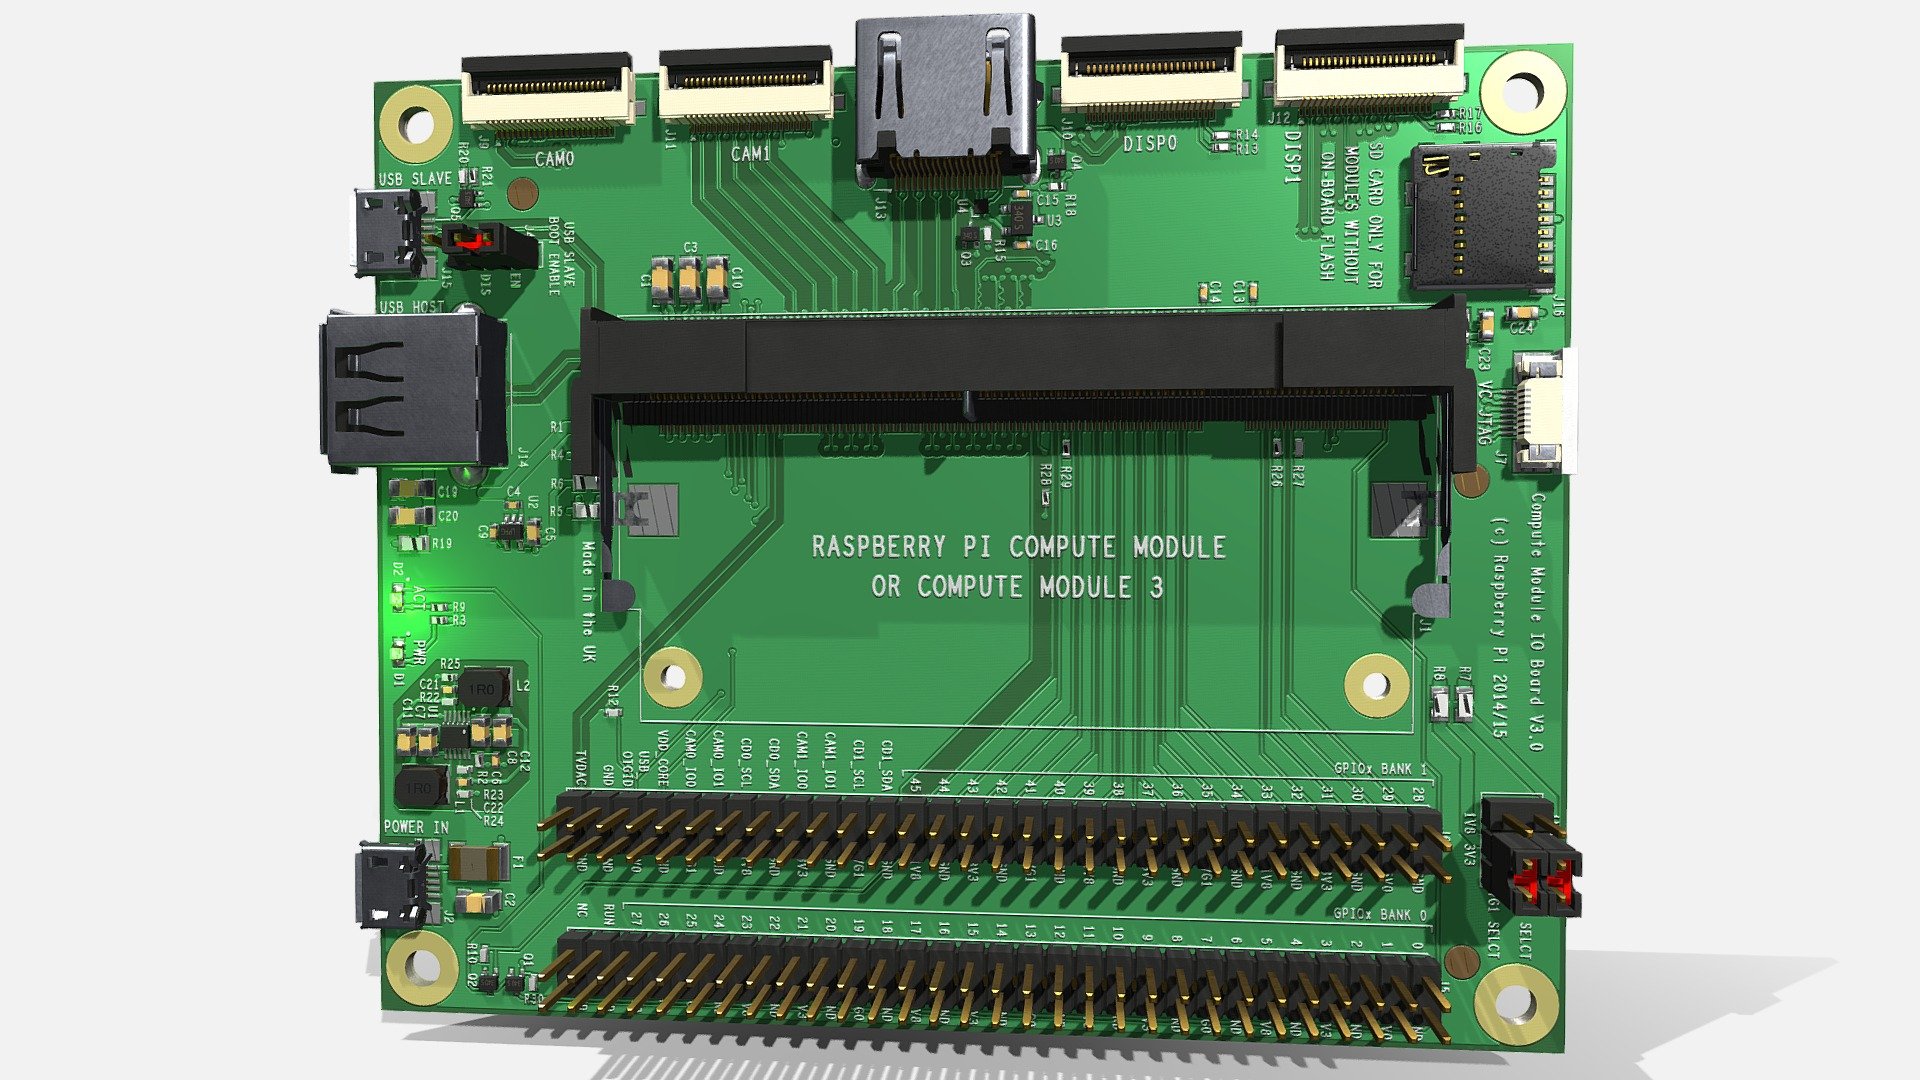 HIGH POLY 3D Model of the  RaspBerry Compute Module IO Board V3. 
Description is visible here : 
https://www.raspberrypi.org/products/compute-module-io-board-v3/

Model designed from the OrCAD/Allegro file availble in the web site and with blender tools v2.79 :
https://www.raspberrypi.org/documentation/hardware/computemodule/designfiles.md

All components can be modified (translate, delete,…).

Don't hesitate to comment somes hardware references that you want to see in sketchfab 3d model